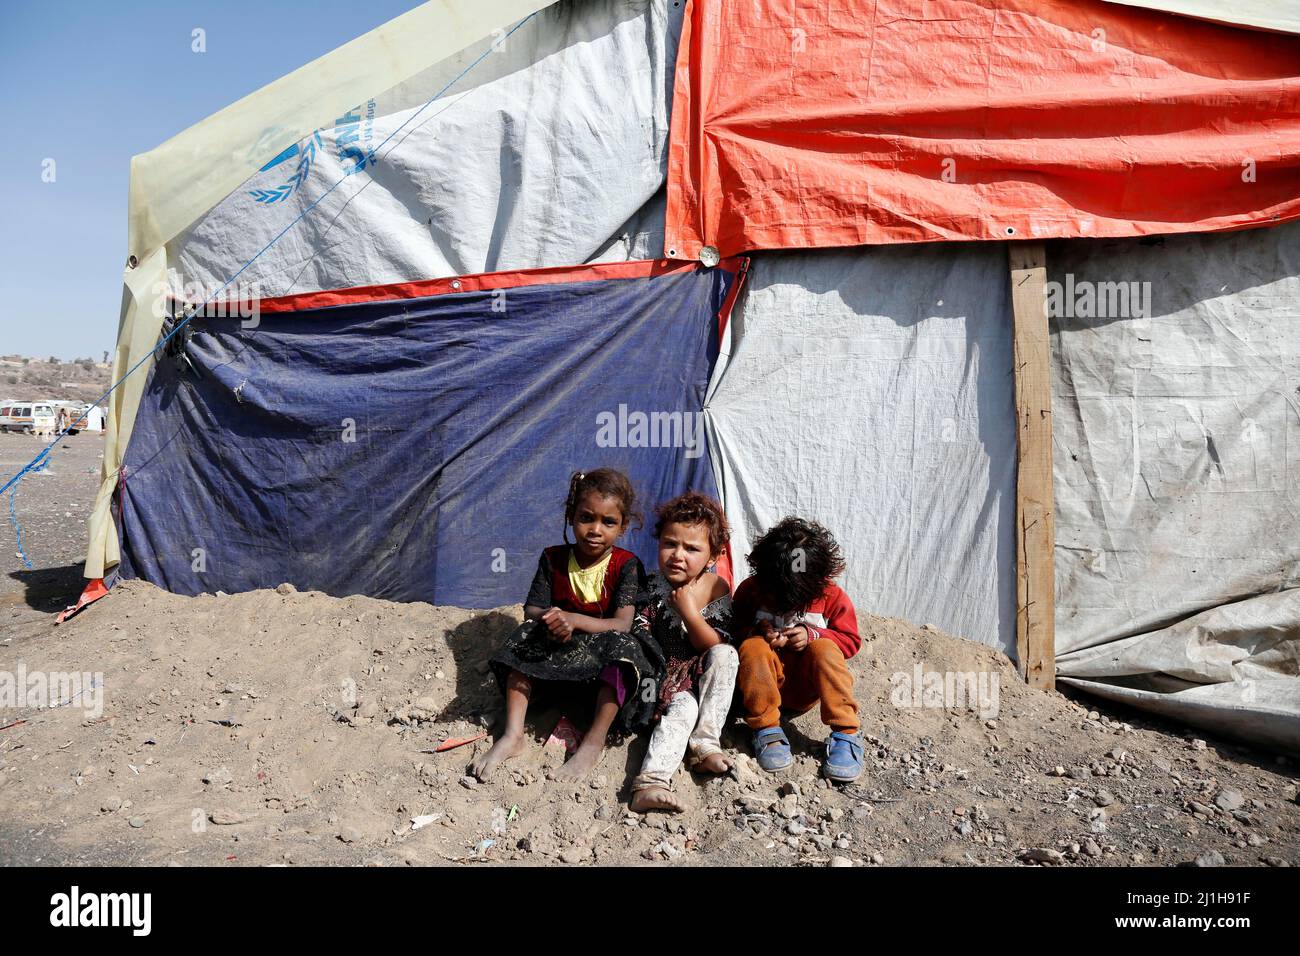 Sanaa, Yemen. 25th Mar, 2022. Children sit in front of a tent at the Dharawan camp for internally displaced persons (IDPs) near Sanaa, Yemen, on March 25, 2022. Yemen has been mired in a civil war since late 2014 when the Iran-backed Houthi militia seized control of several northern provinces and forced the Saudi-backed Yemeni government of President Abd-Rabbu Mansour Hadi out of the capital Sanaa. Credit: Mohammed Mohammed/Xinhua/Alamy Live News Stock Photo